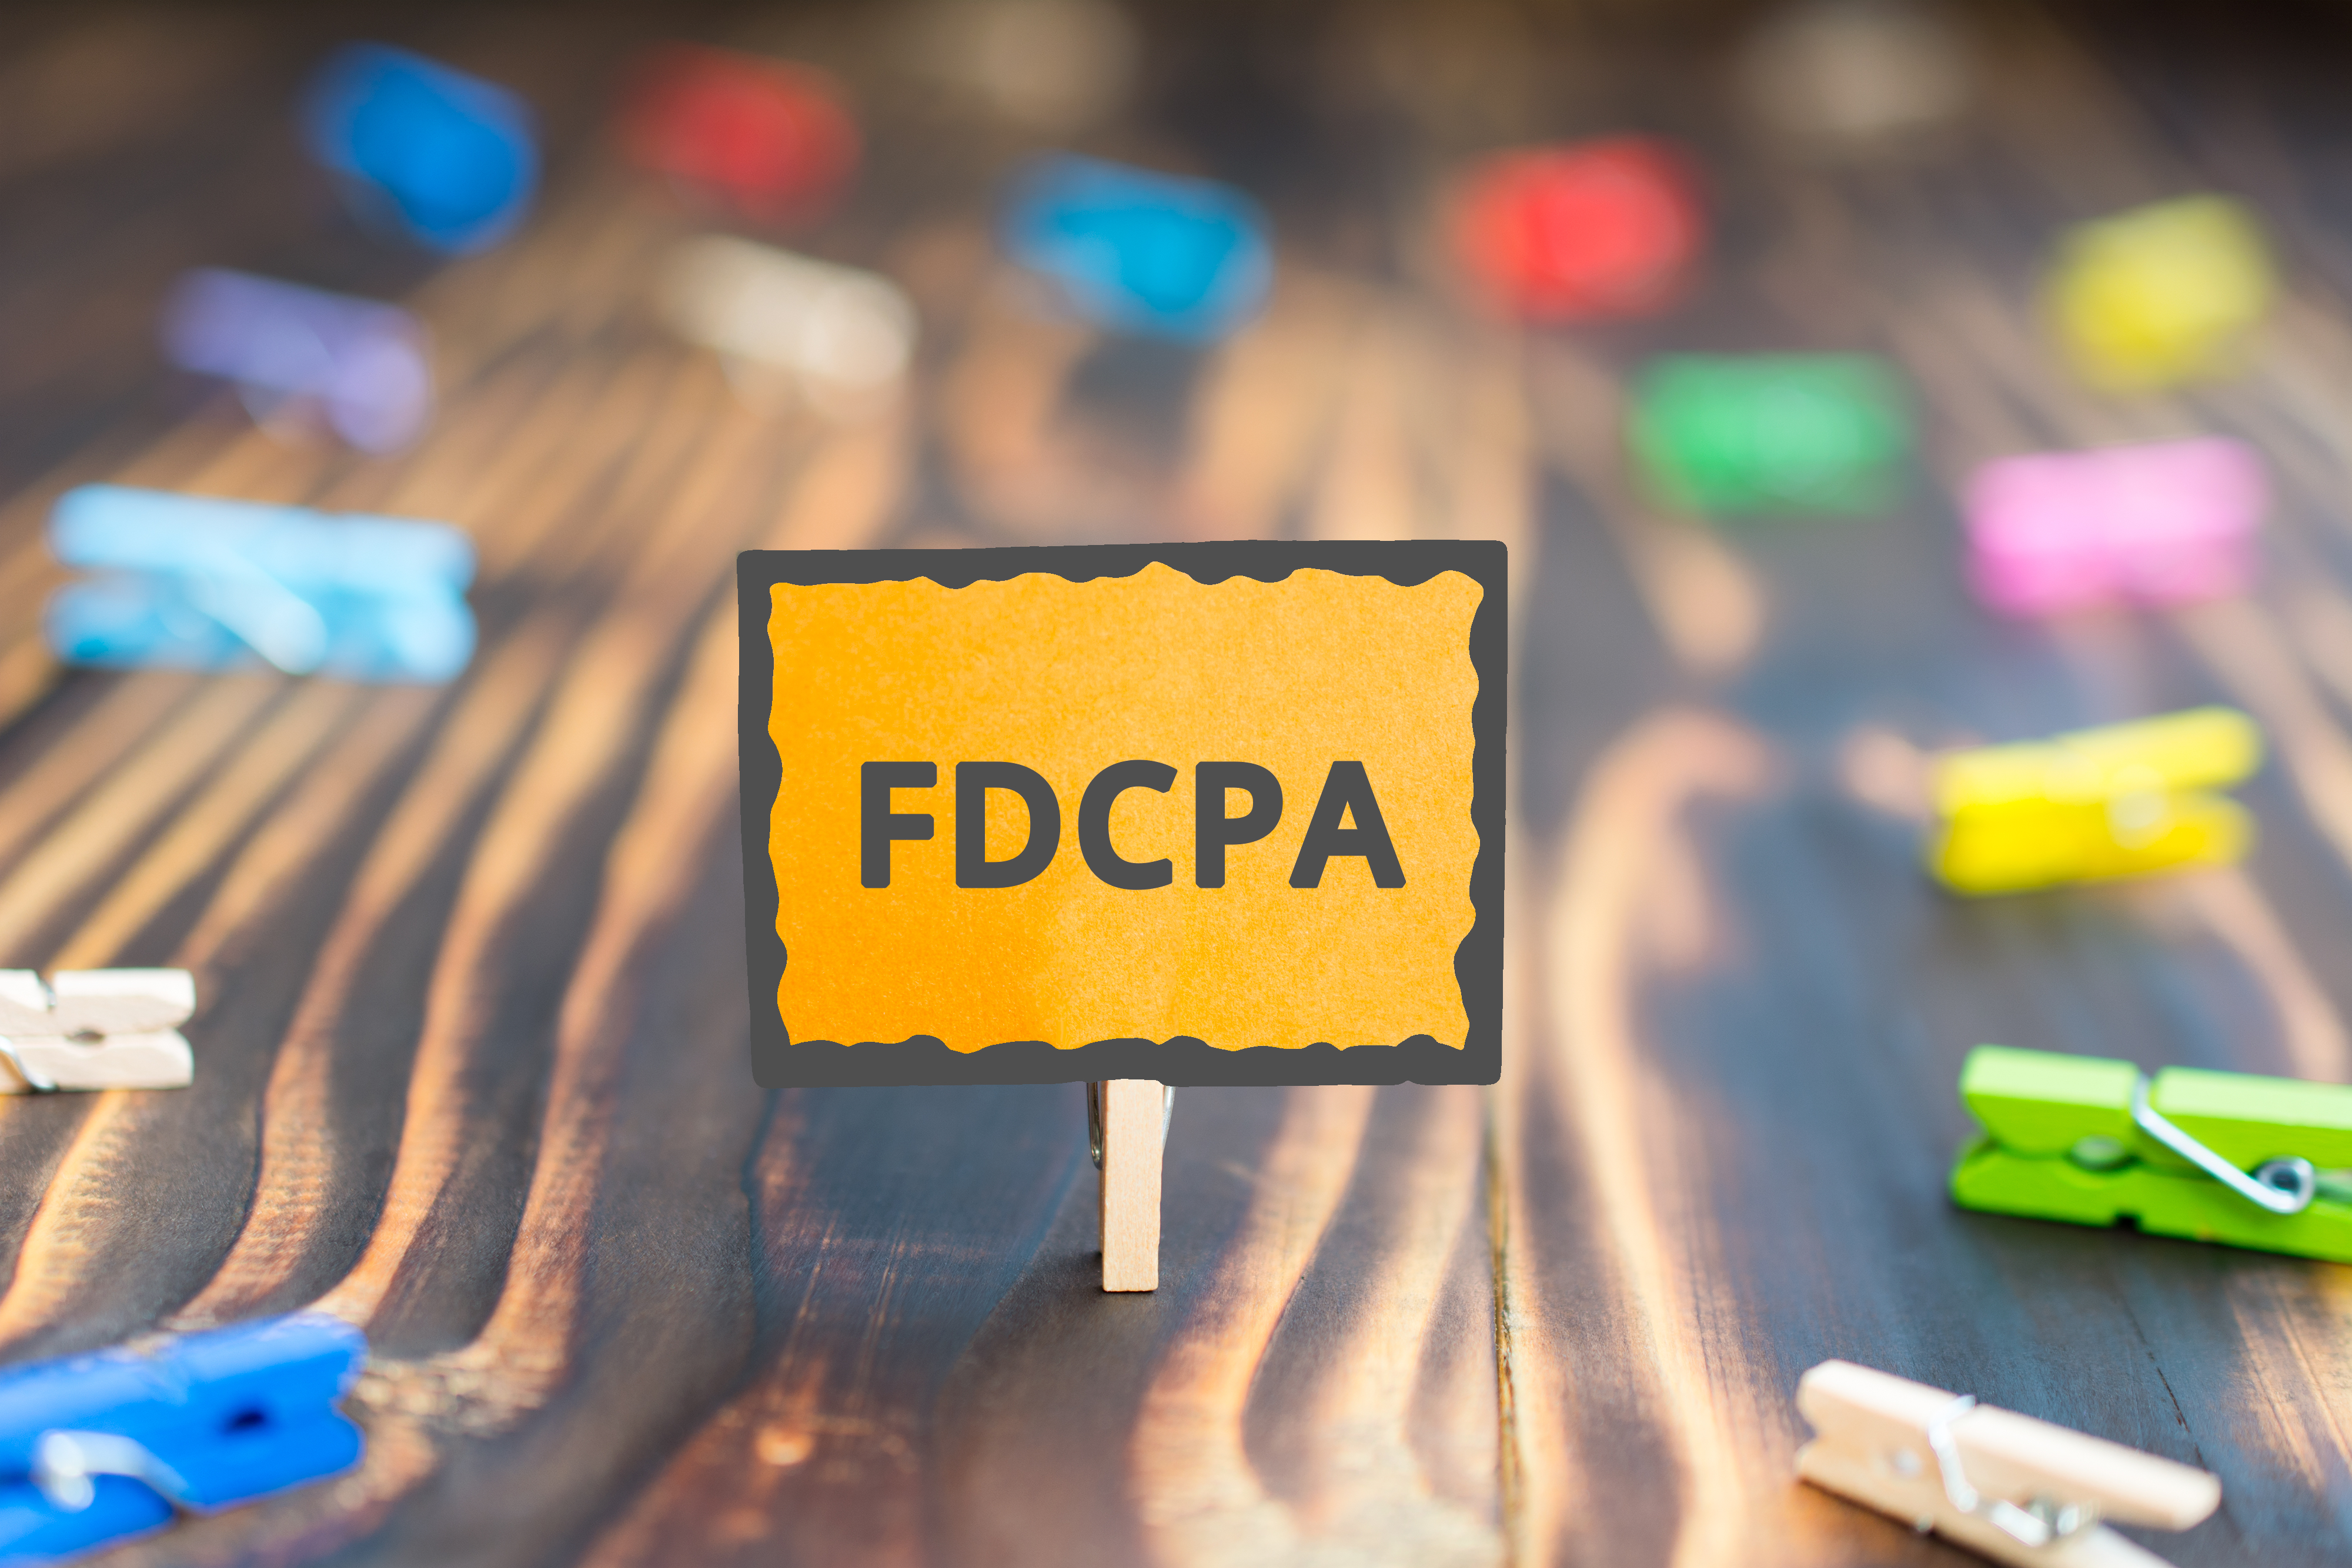 What is the FDCPA designed to do